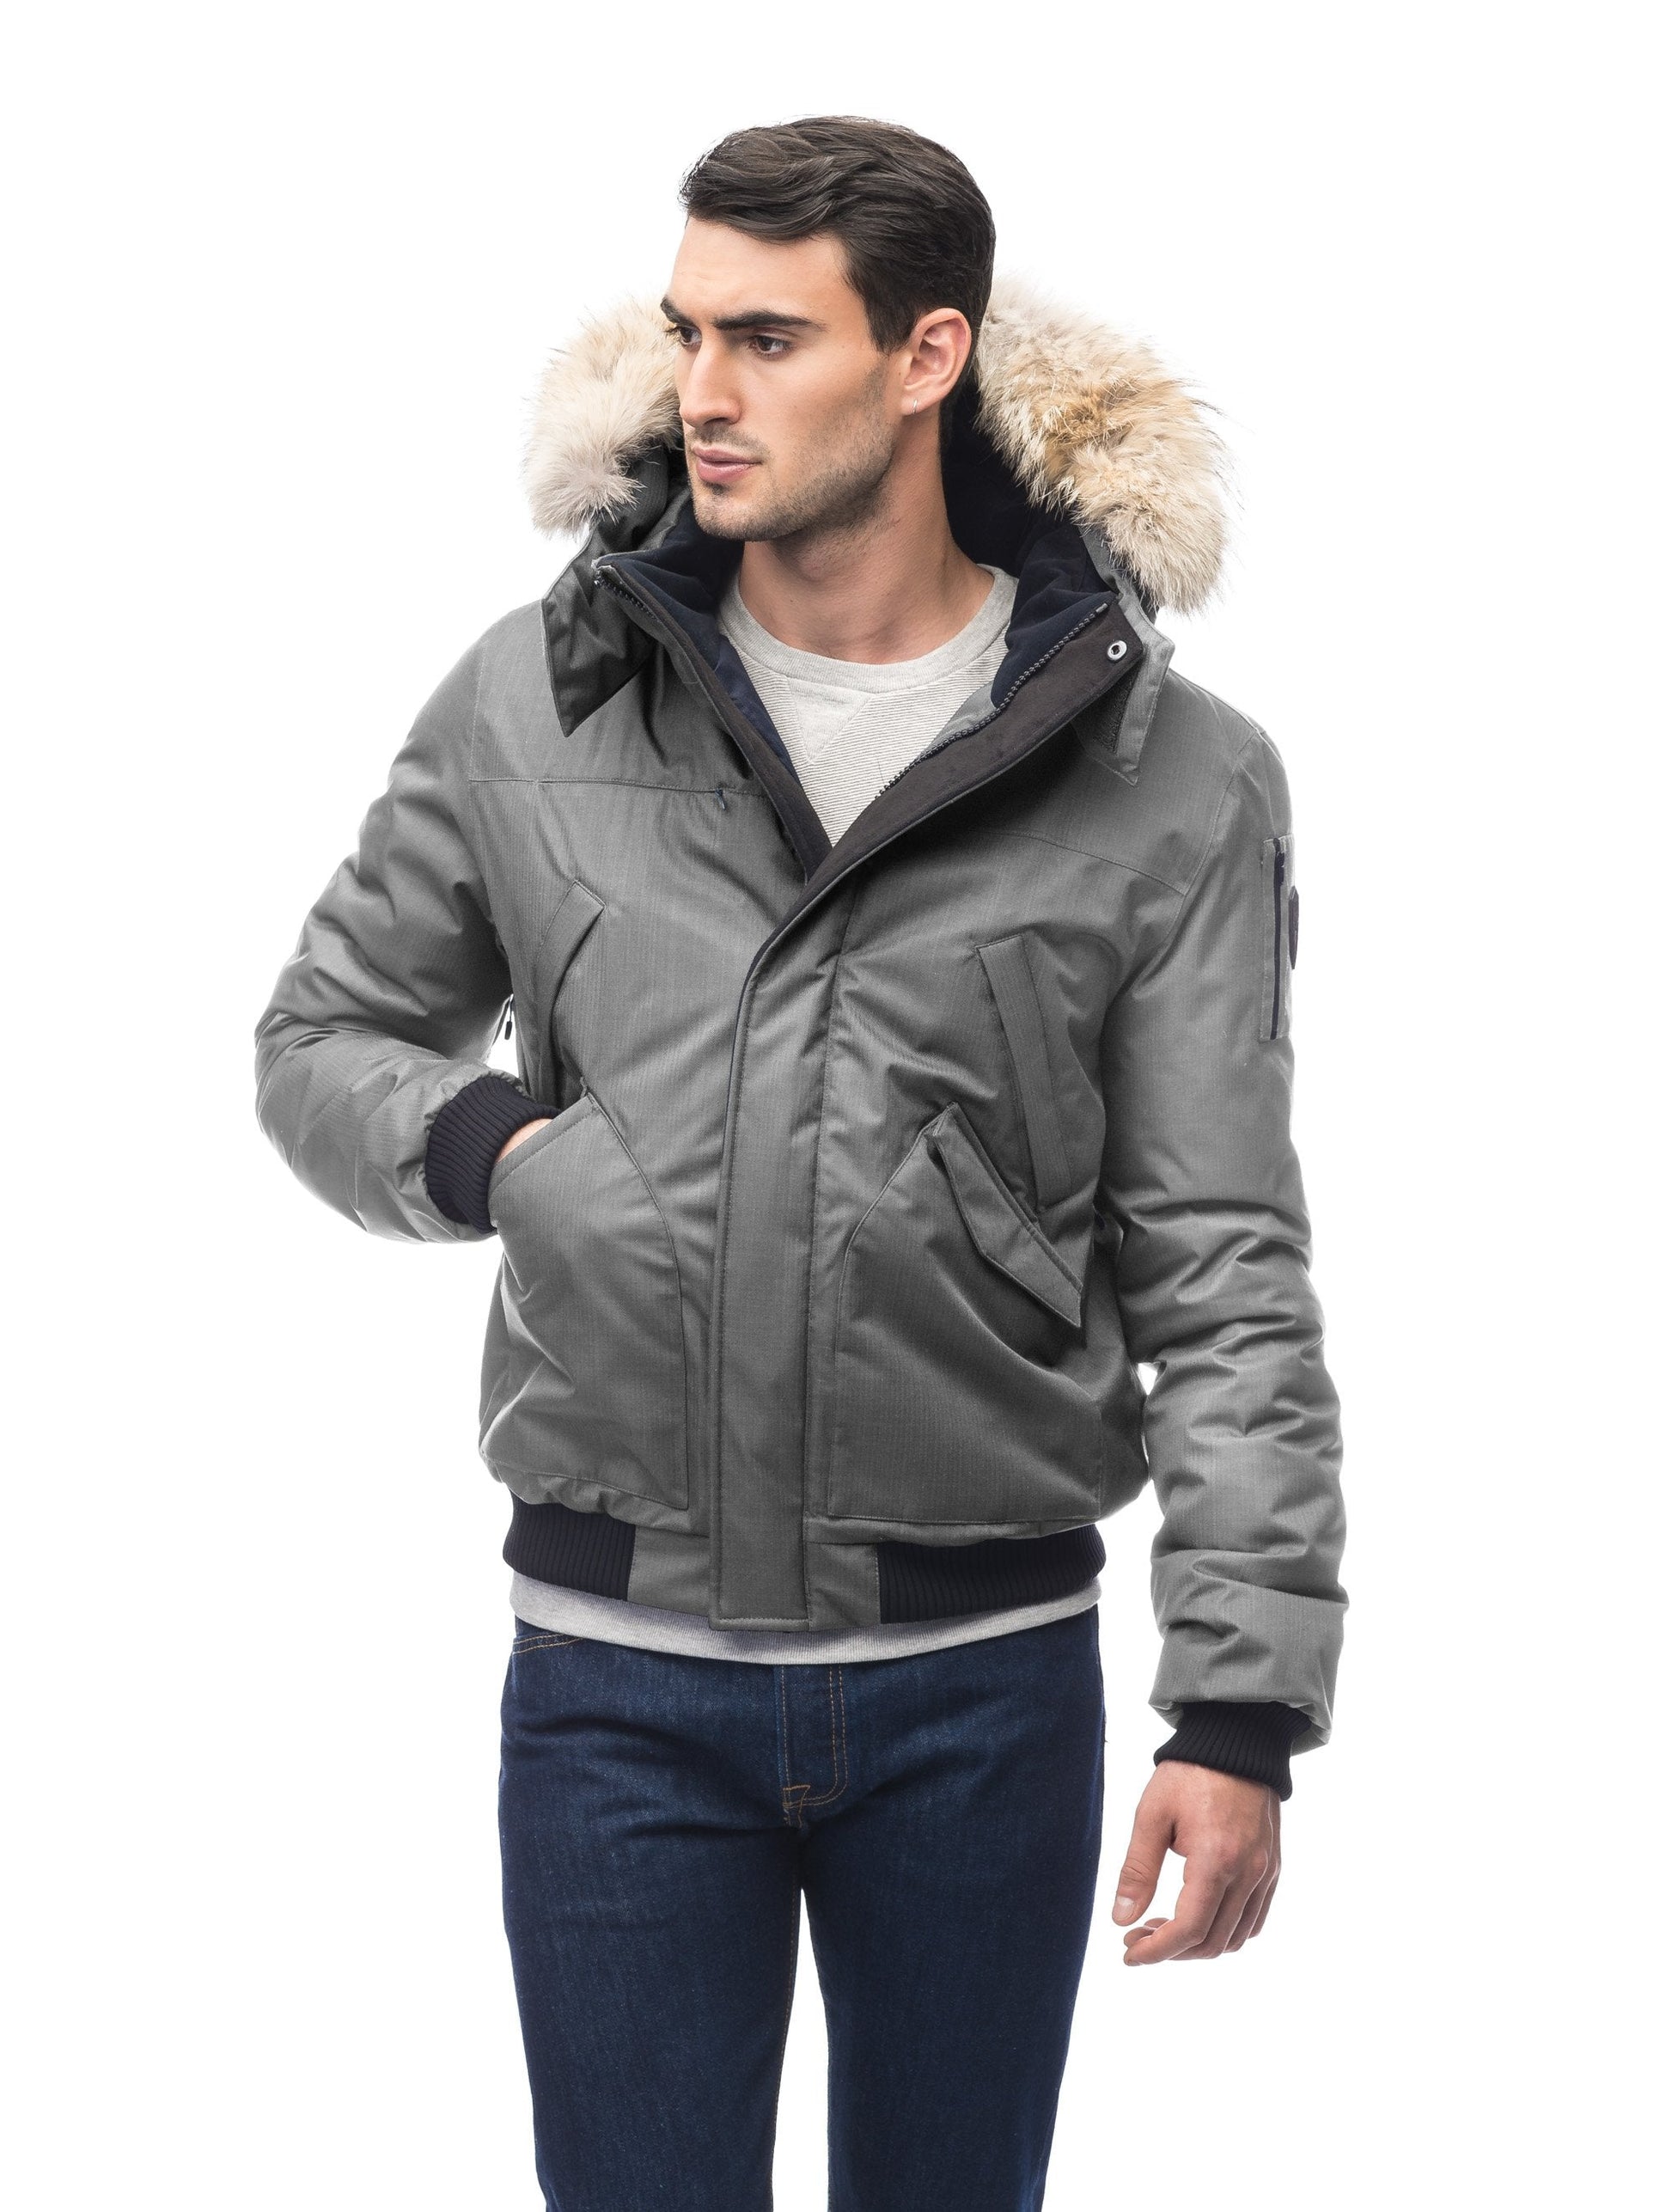 Men's classic down filled bomber jacket with a down filled hood that features a removable coyote fur trim and concealed moldable framing wire in Concrete